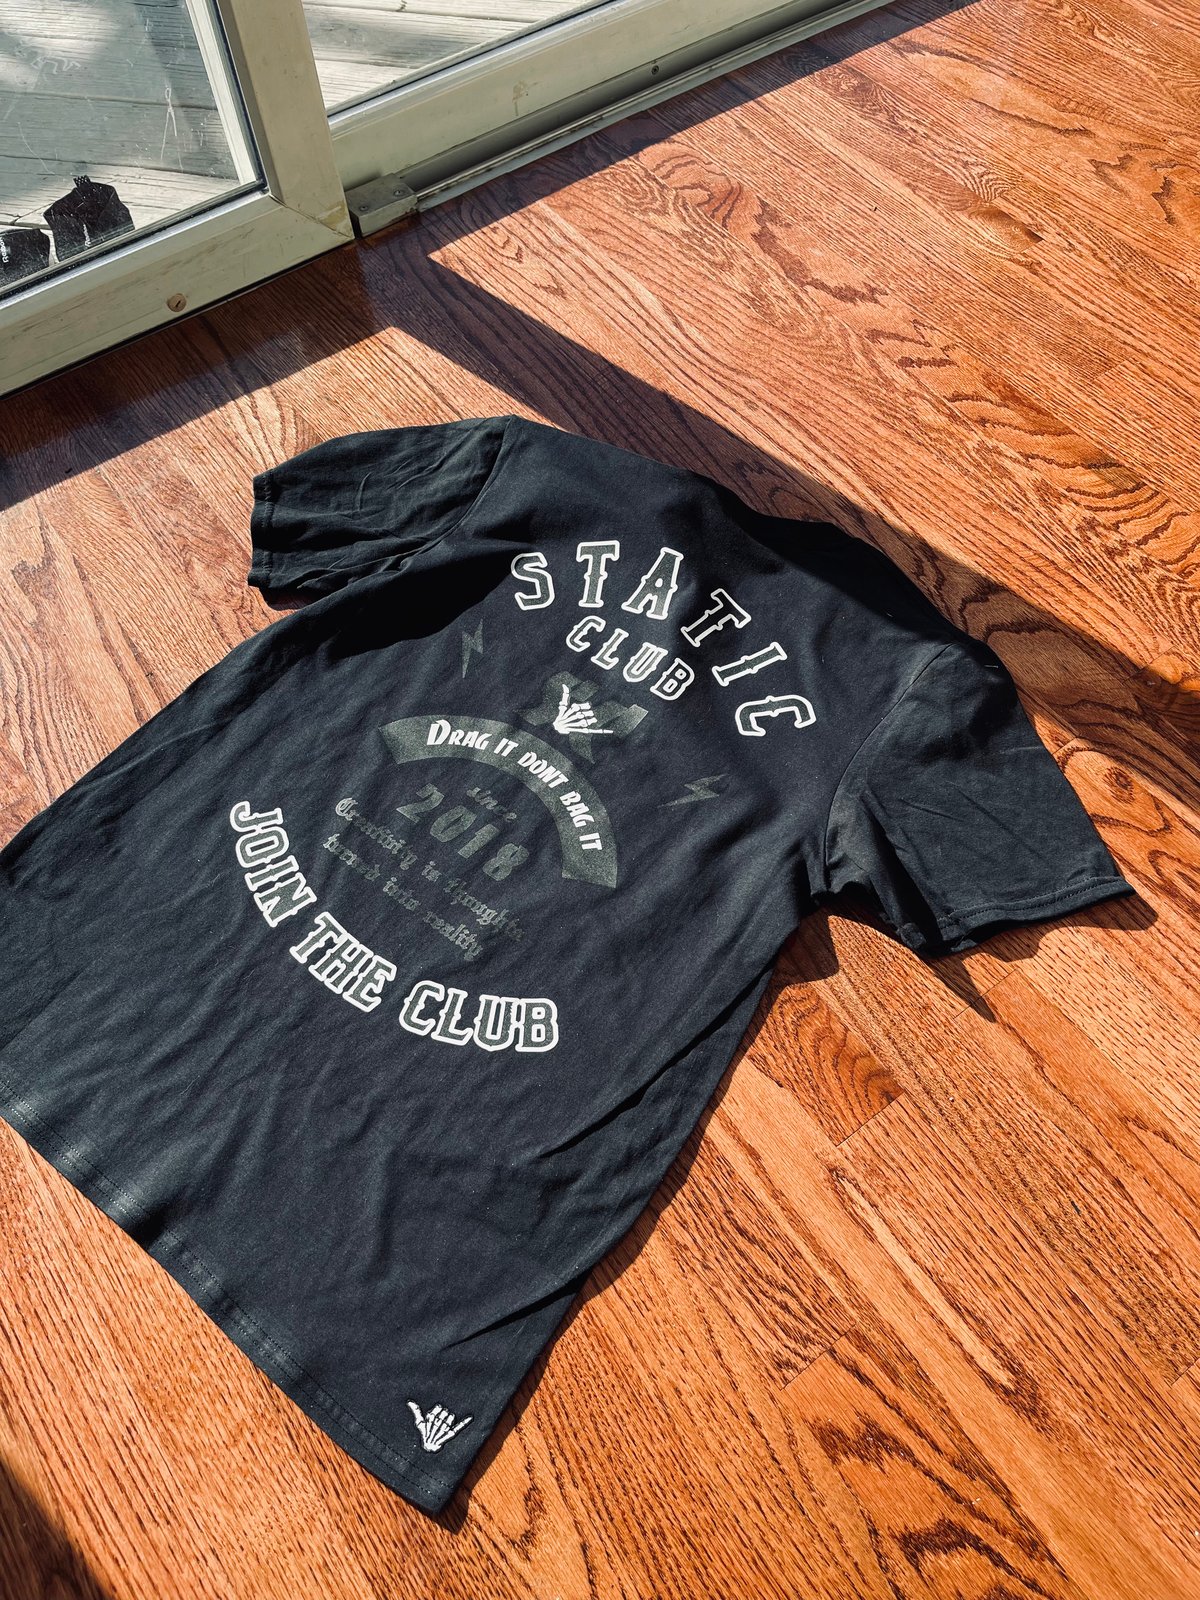 Join The Club Tee [Black]